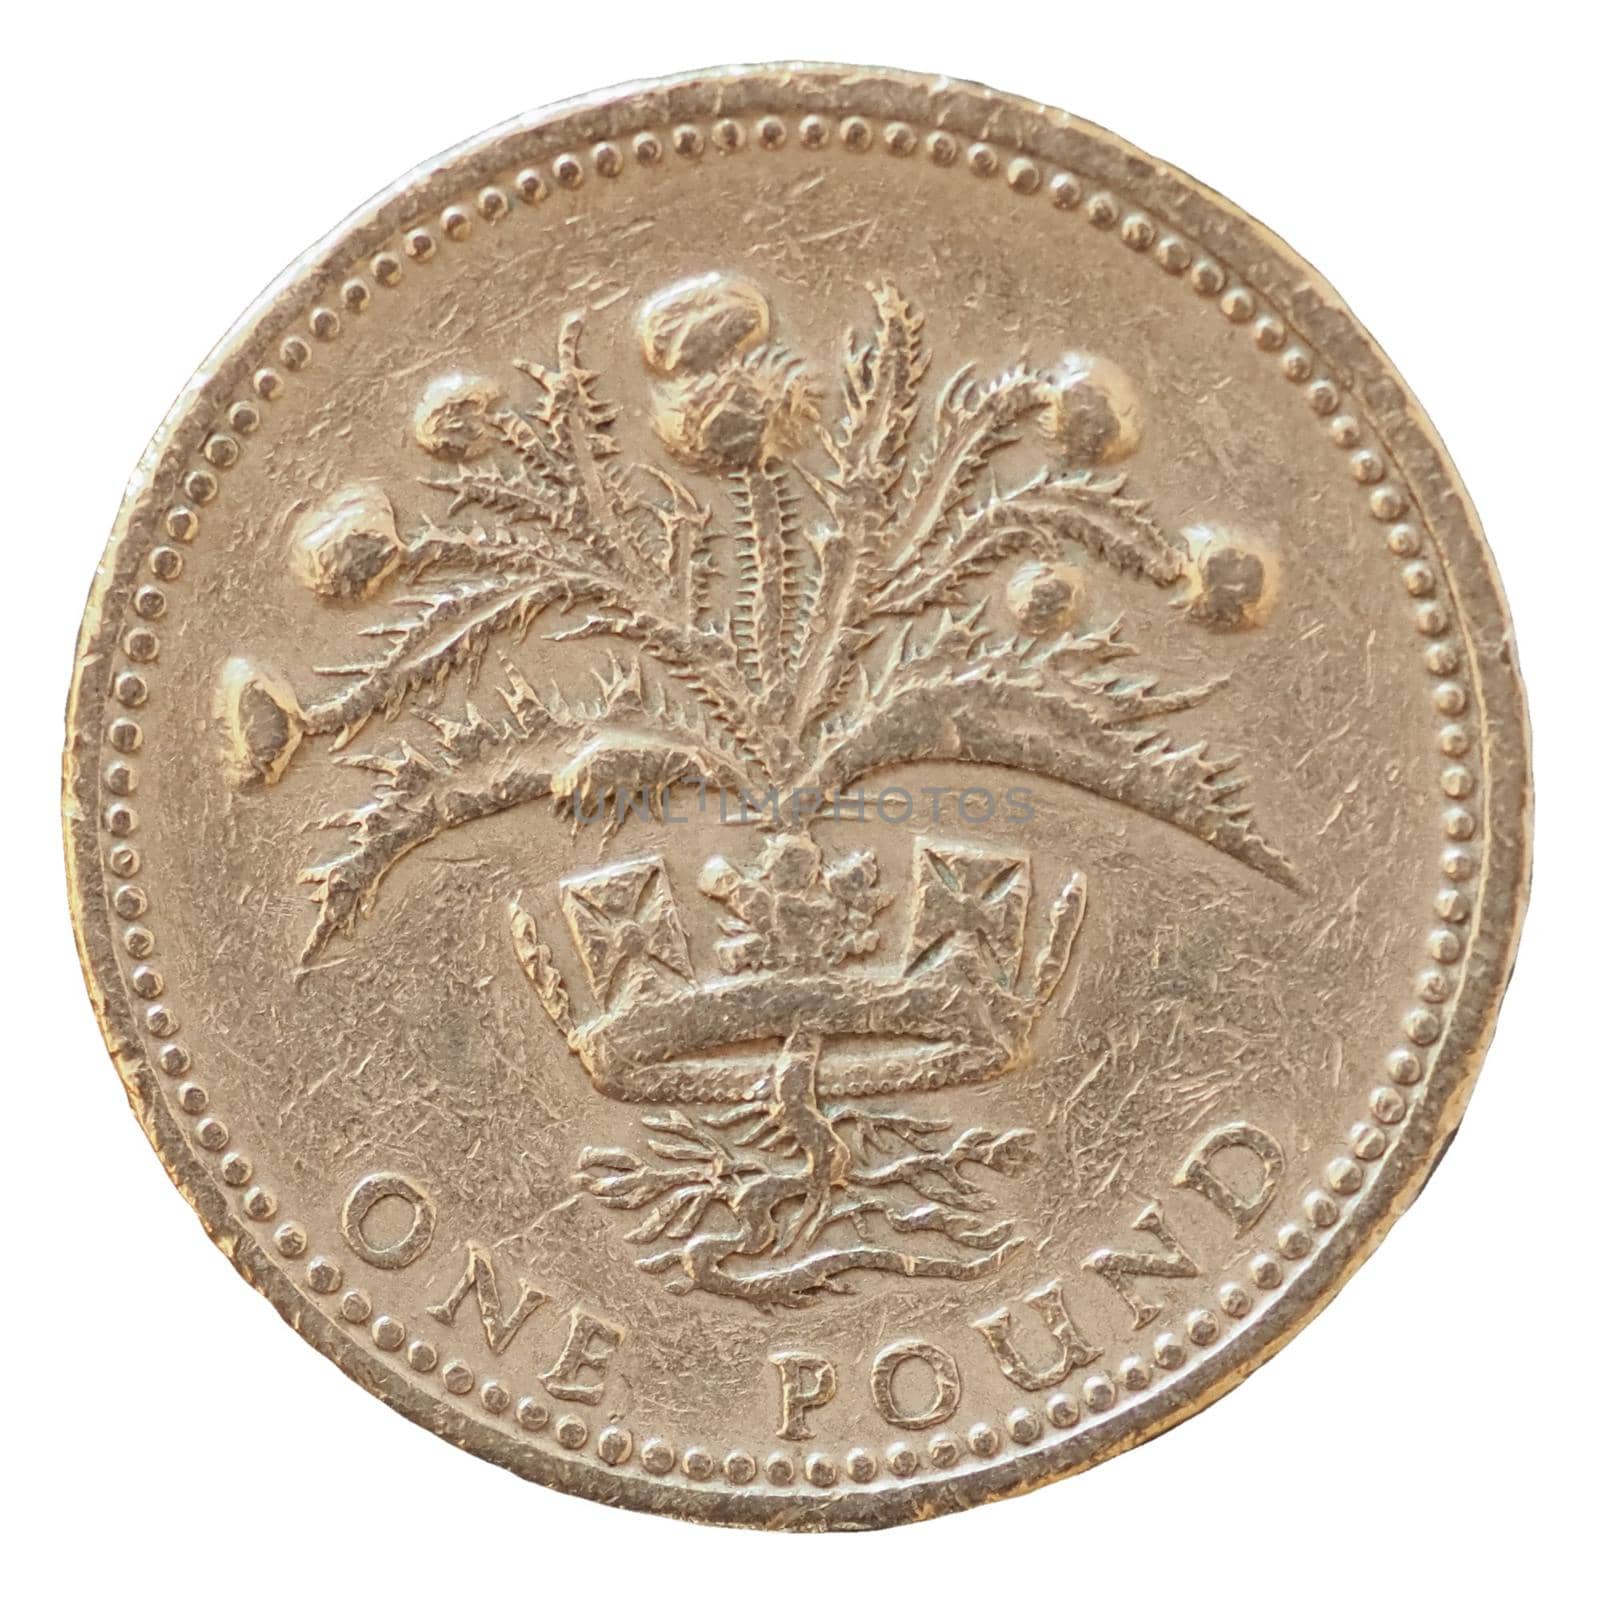 1 pound coin money (GBP), currency of United Kingdom